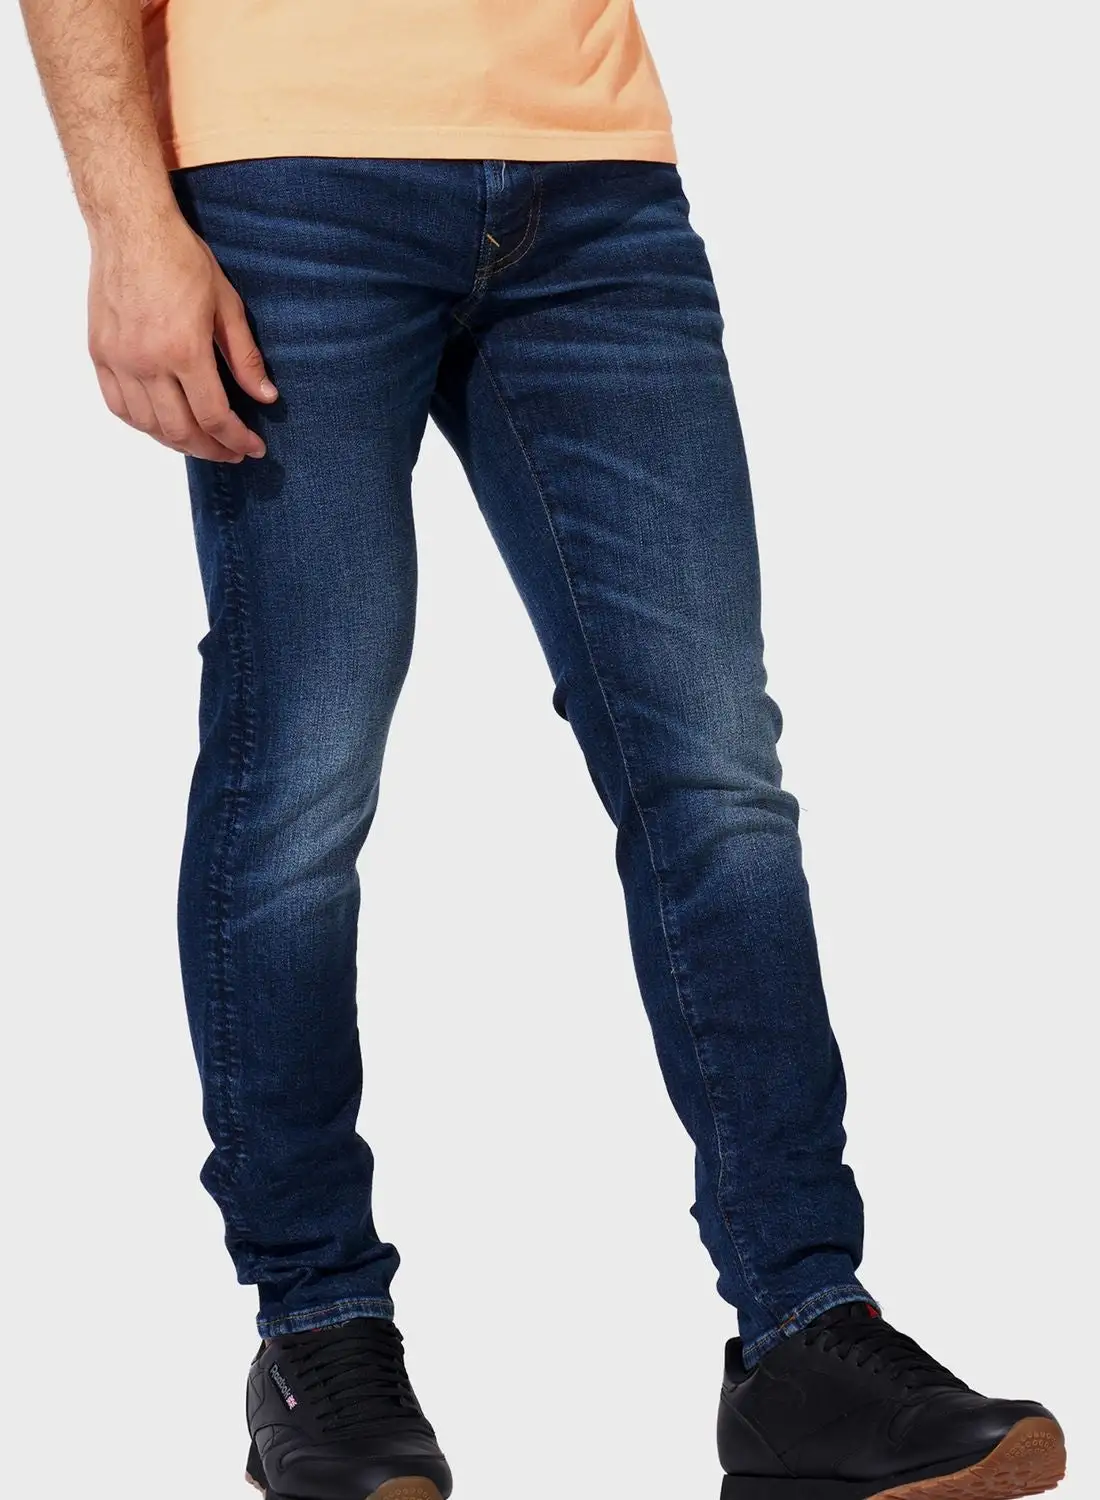 American Eagle Light Wash Skinny Fit Jeans